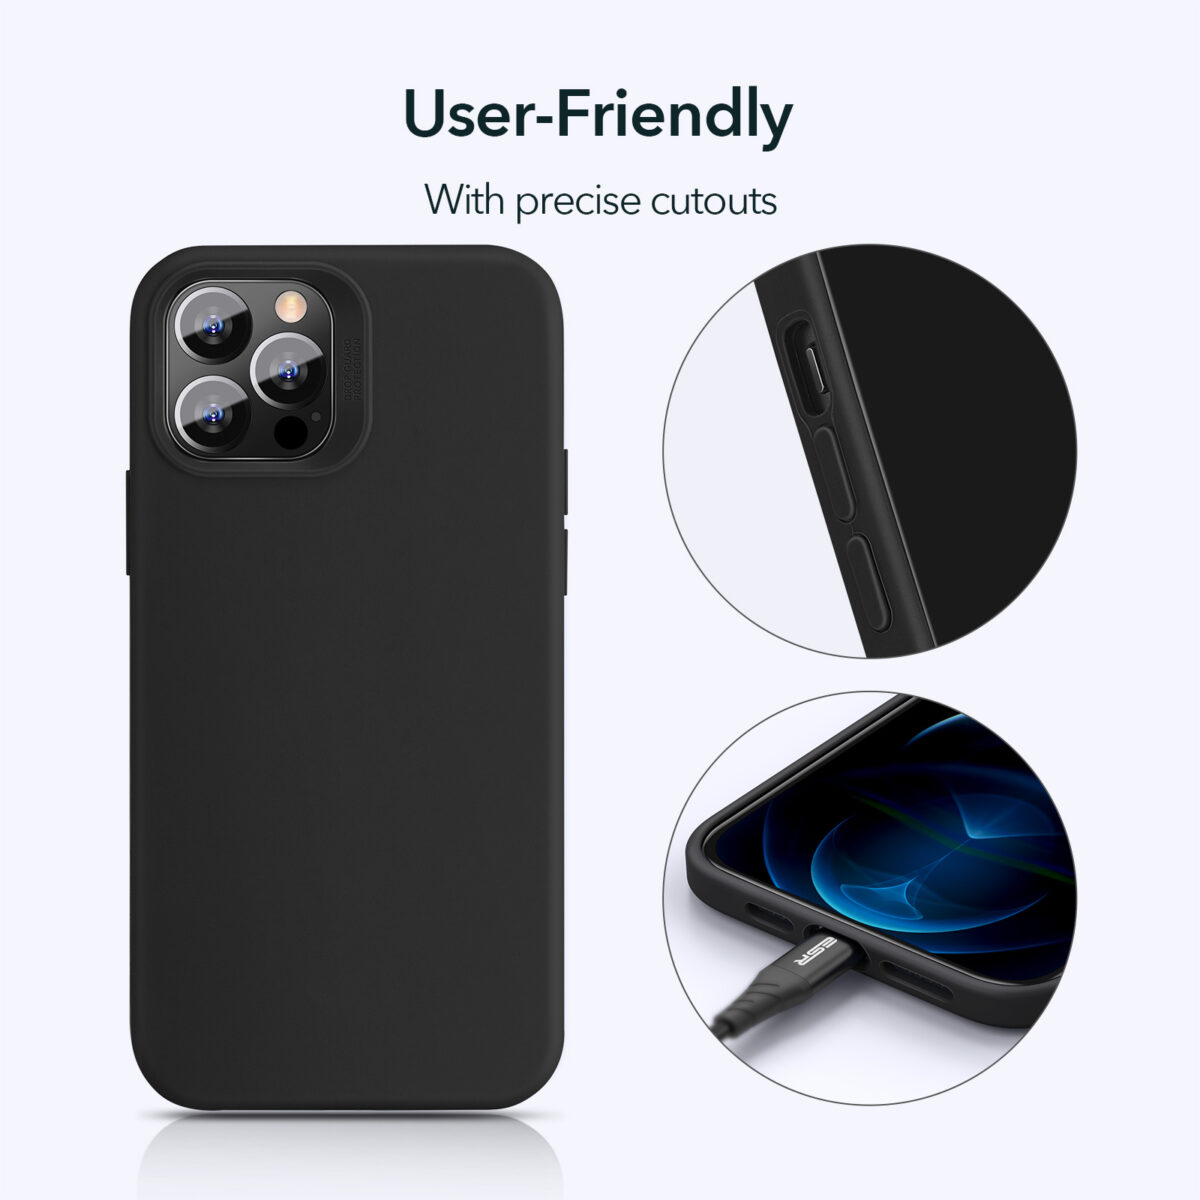 Silky smooth Silicone user-friendly case for iPhone 12 Black